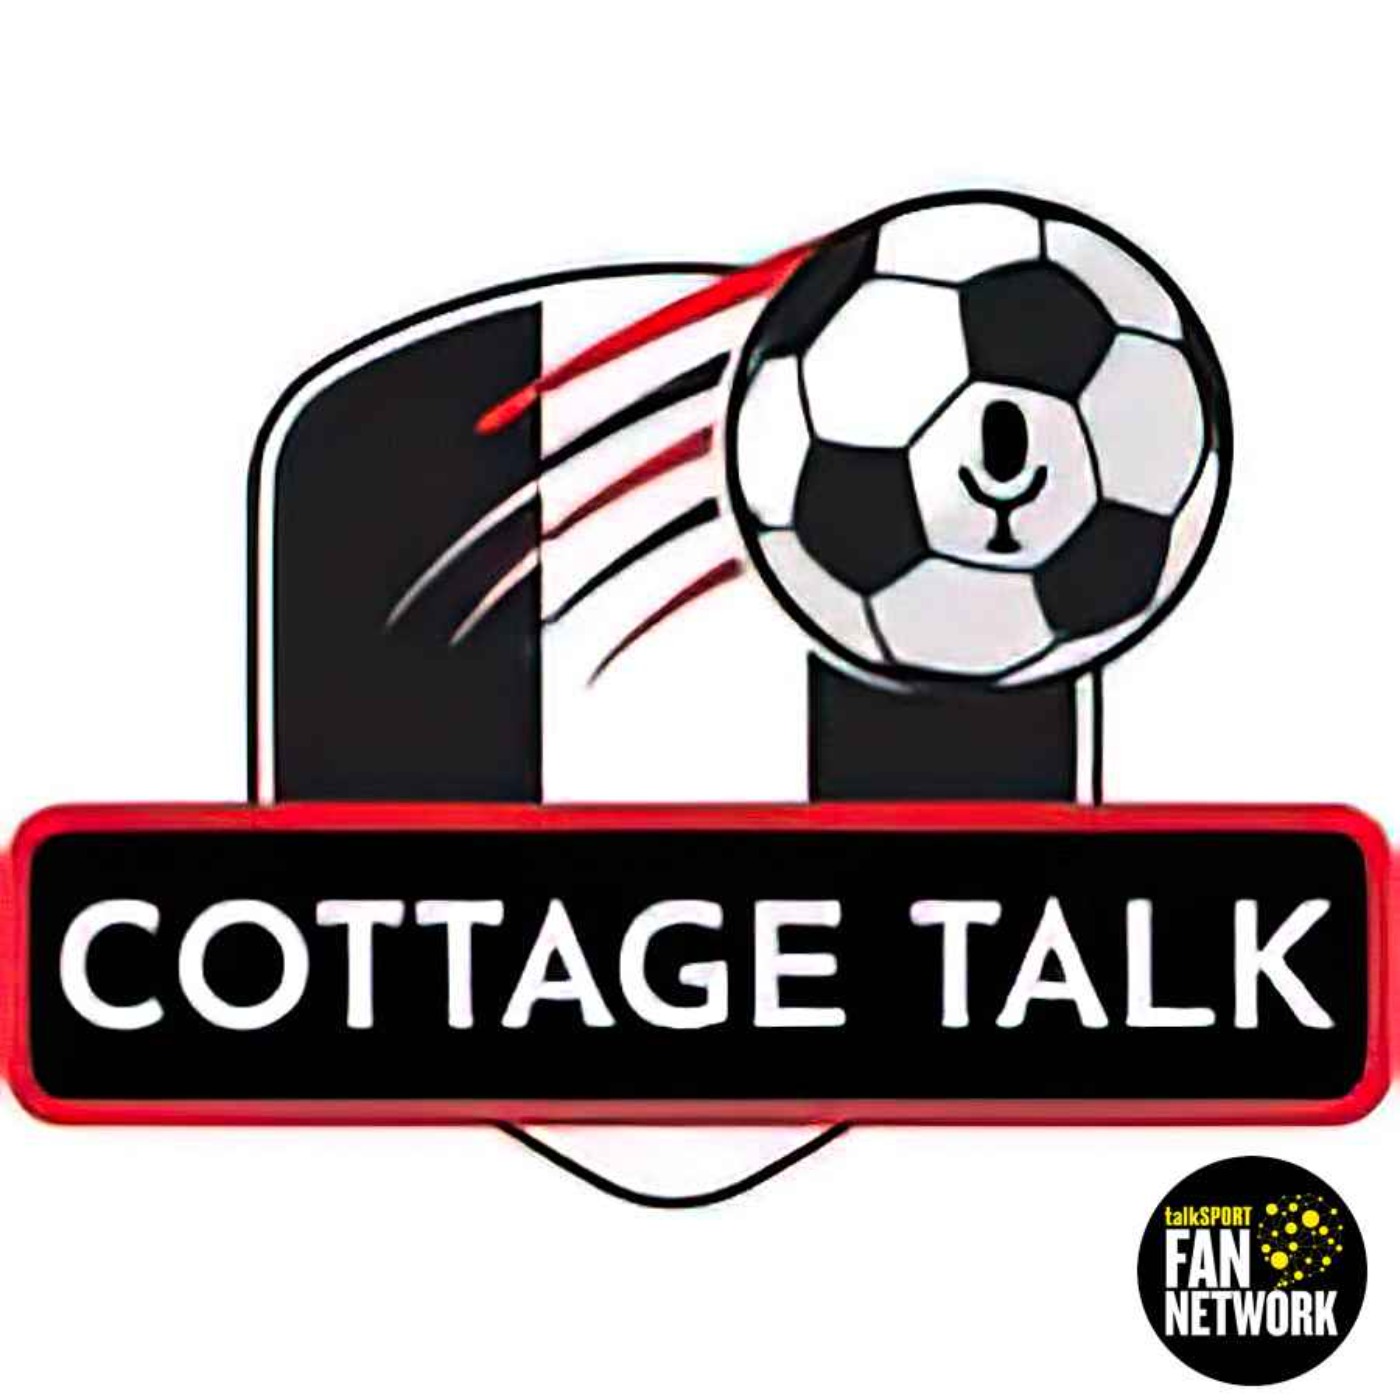 Cottage Talk Preview: My Five Keys To Victory Against Sheffield United